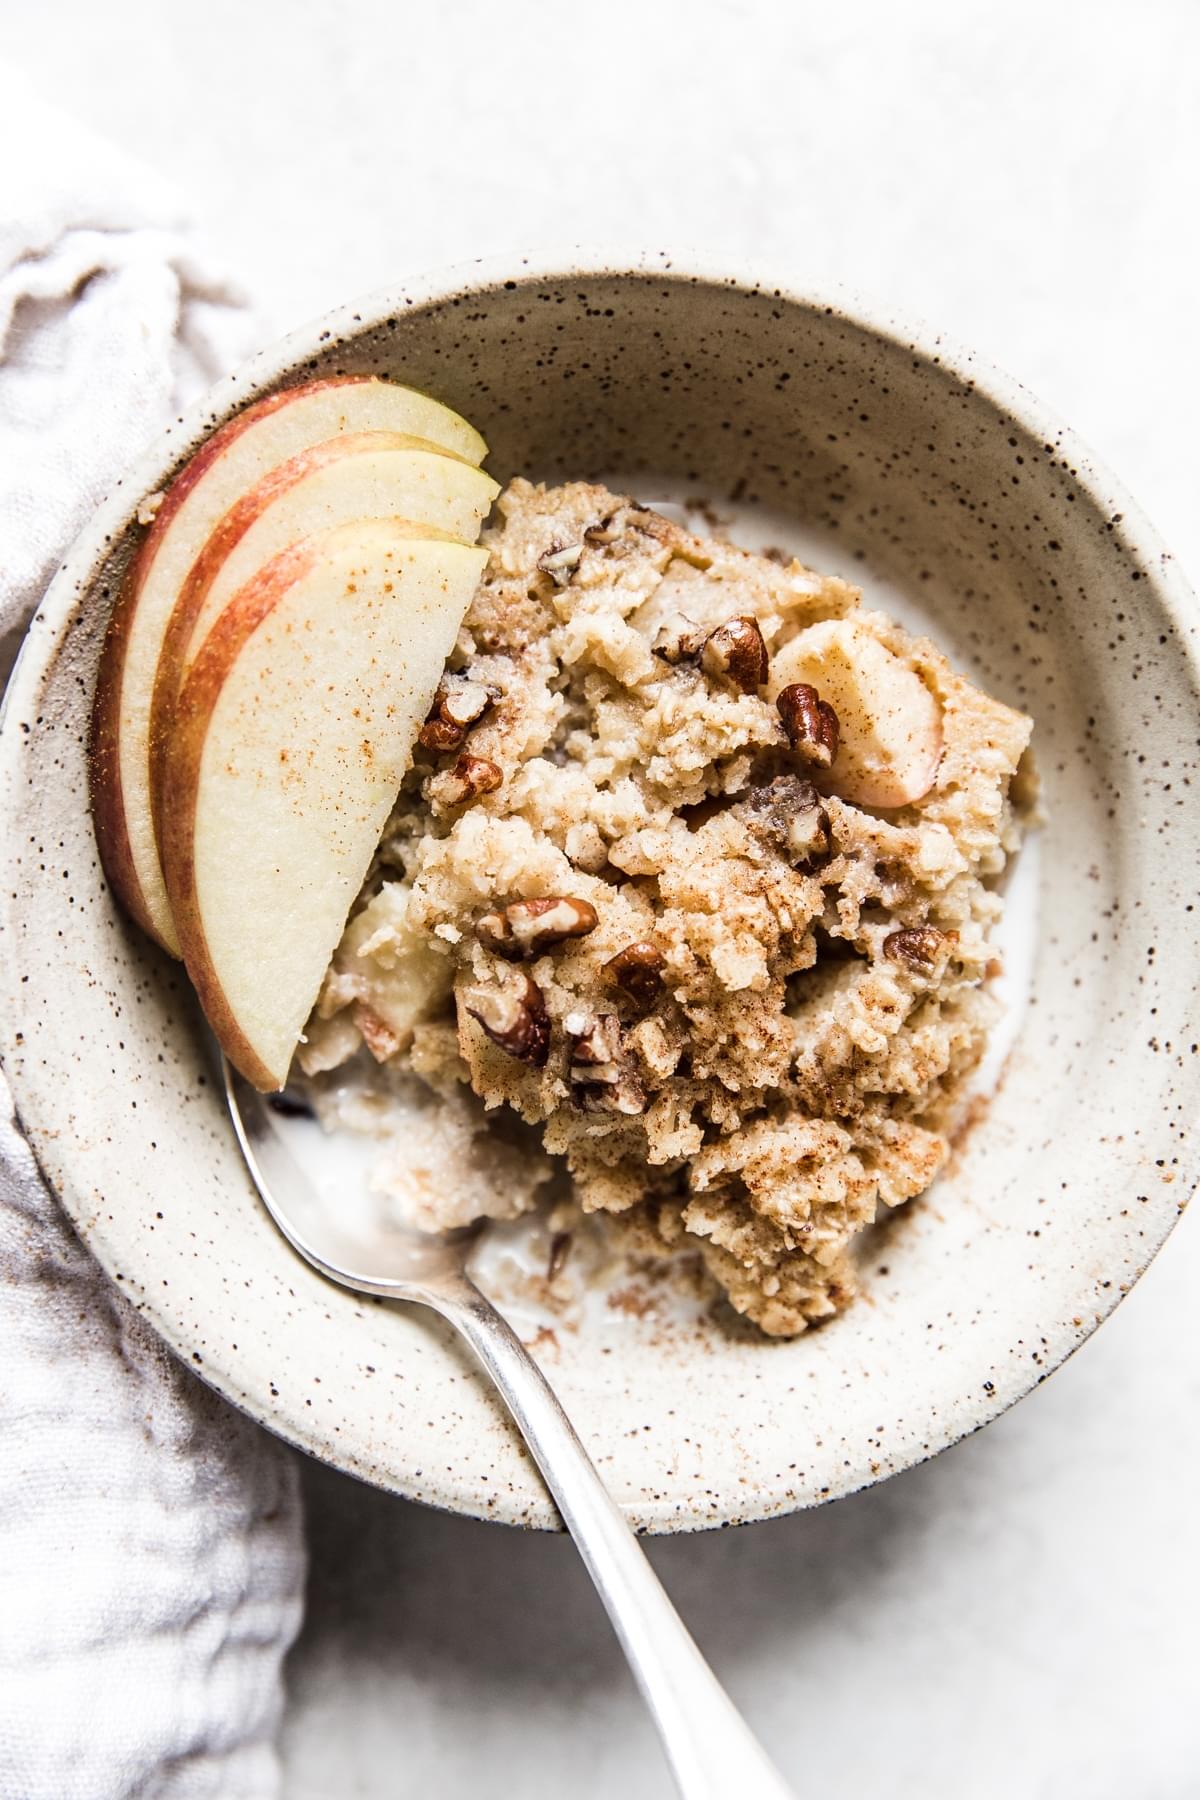 Baked Oatmeal With Apples in a bowl with apple slices, maple syrup and milk